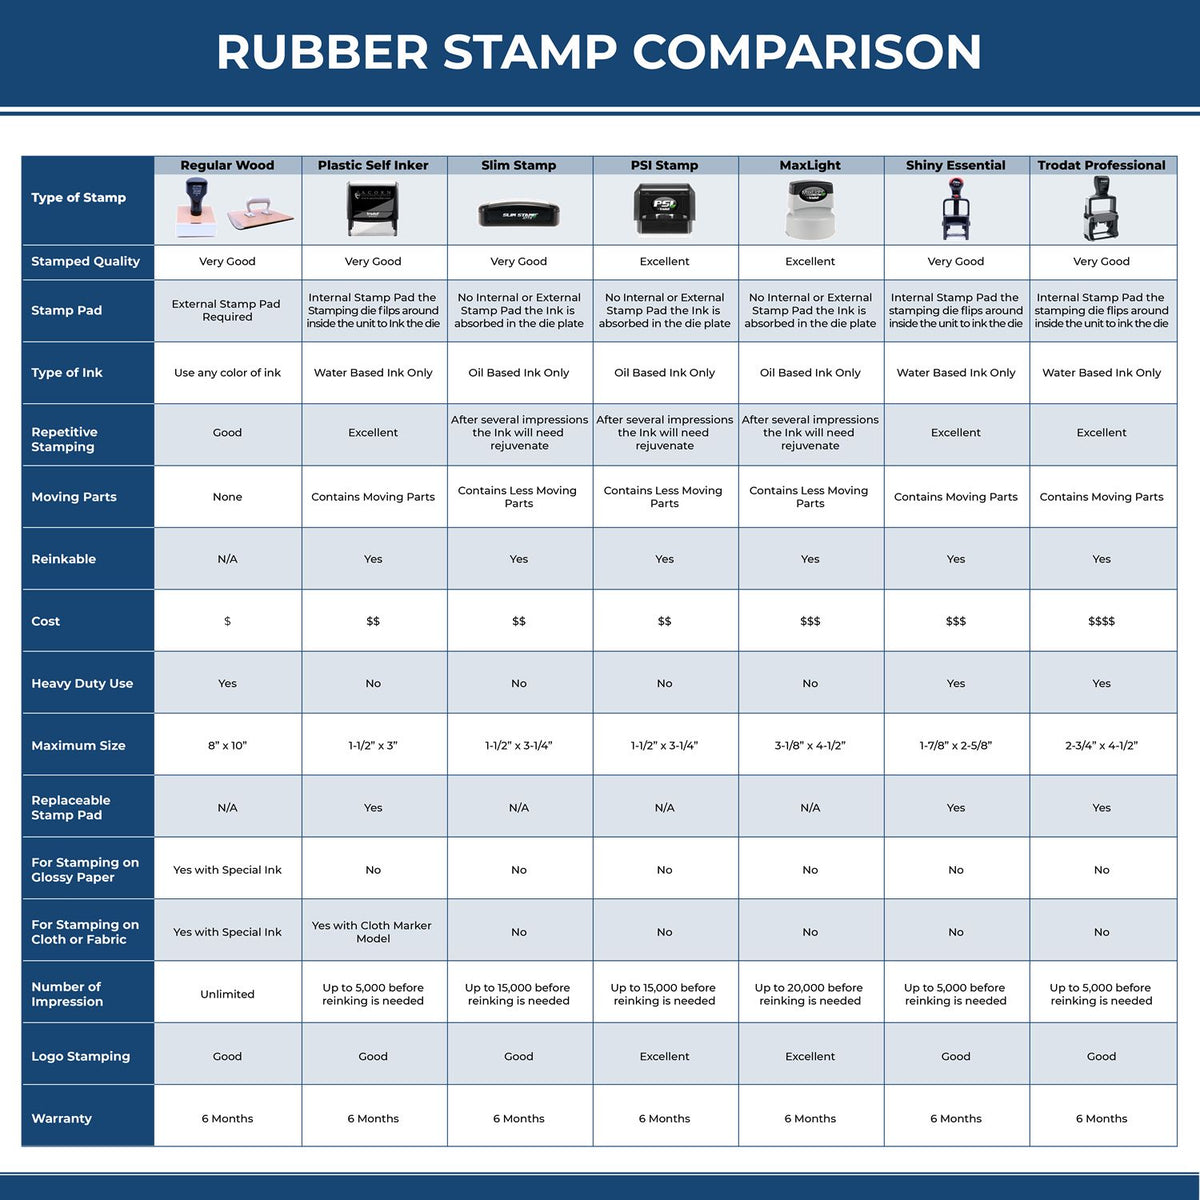 Large Self-Inking 1st 2nd Notice Returned Stamp 5578S Rubber Stamp Comparison